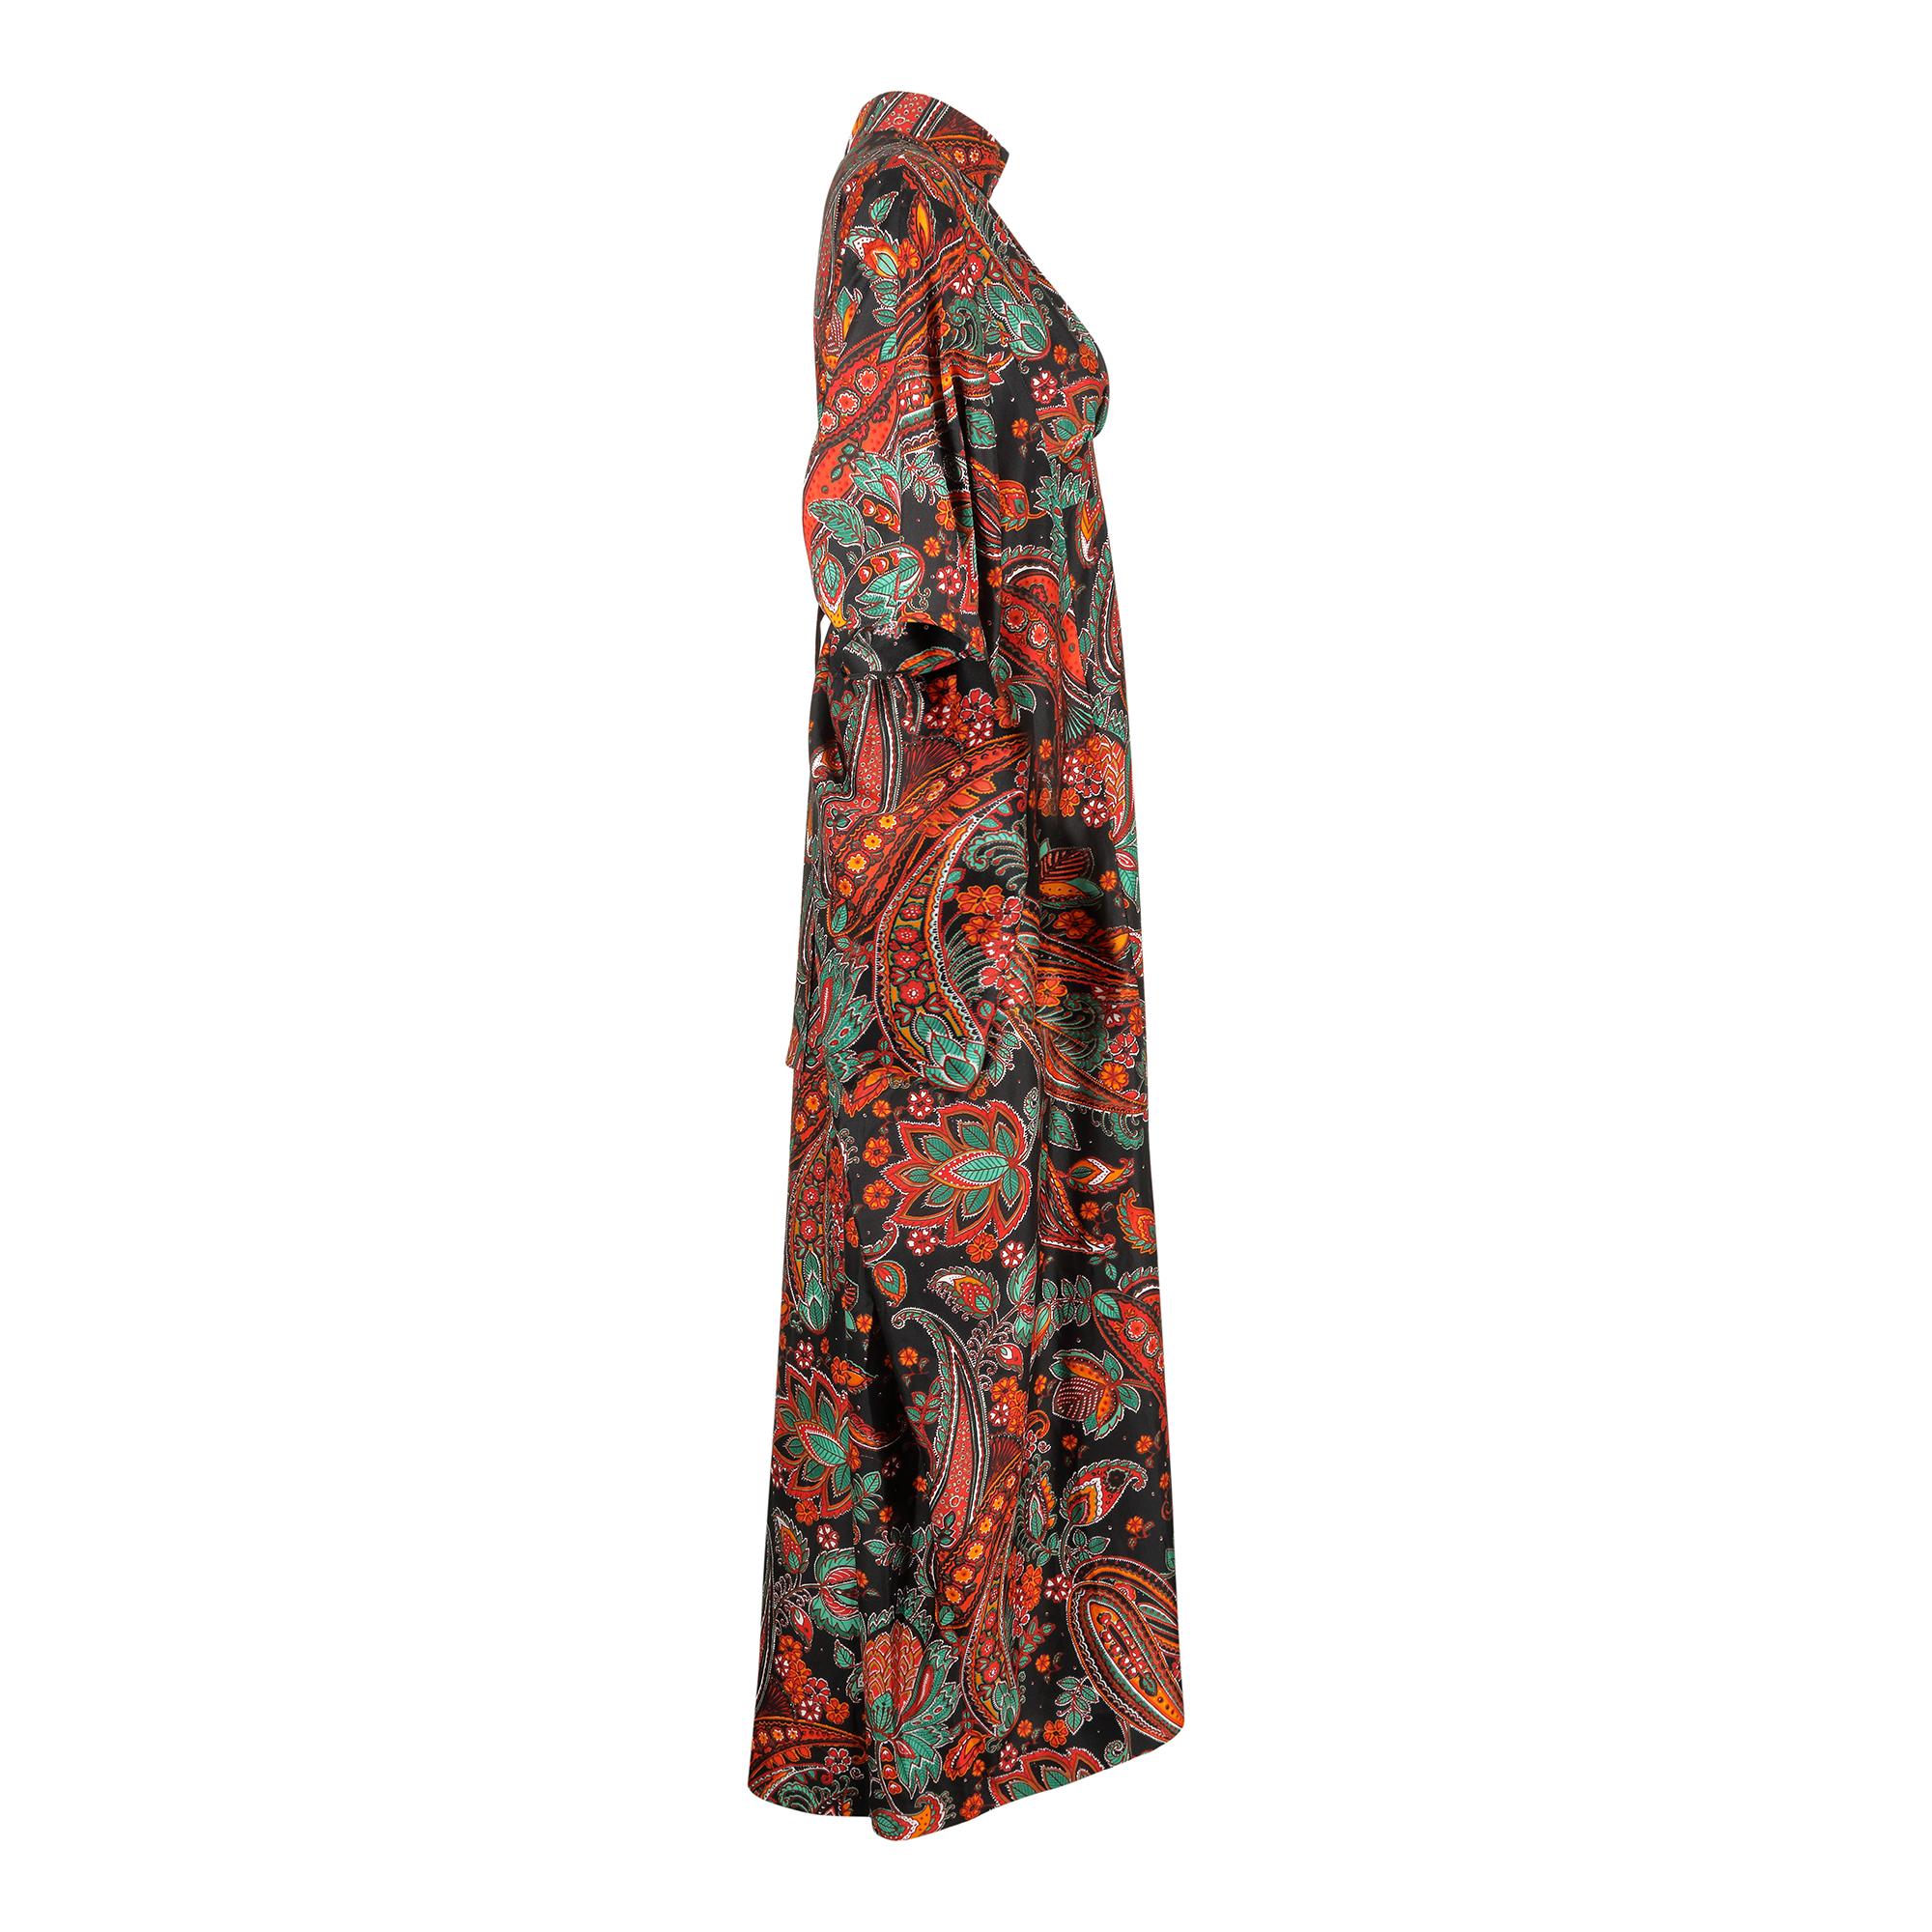 A striking and original 1970s kaftan or trapeze style dress.  It has a brightly coloured floral Paisley pattern in red, orange, green and white tones against a black background. The fabric composition is not known but it feels like a good quality